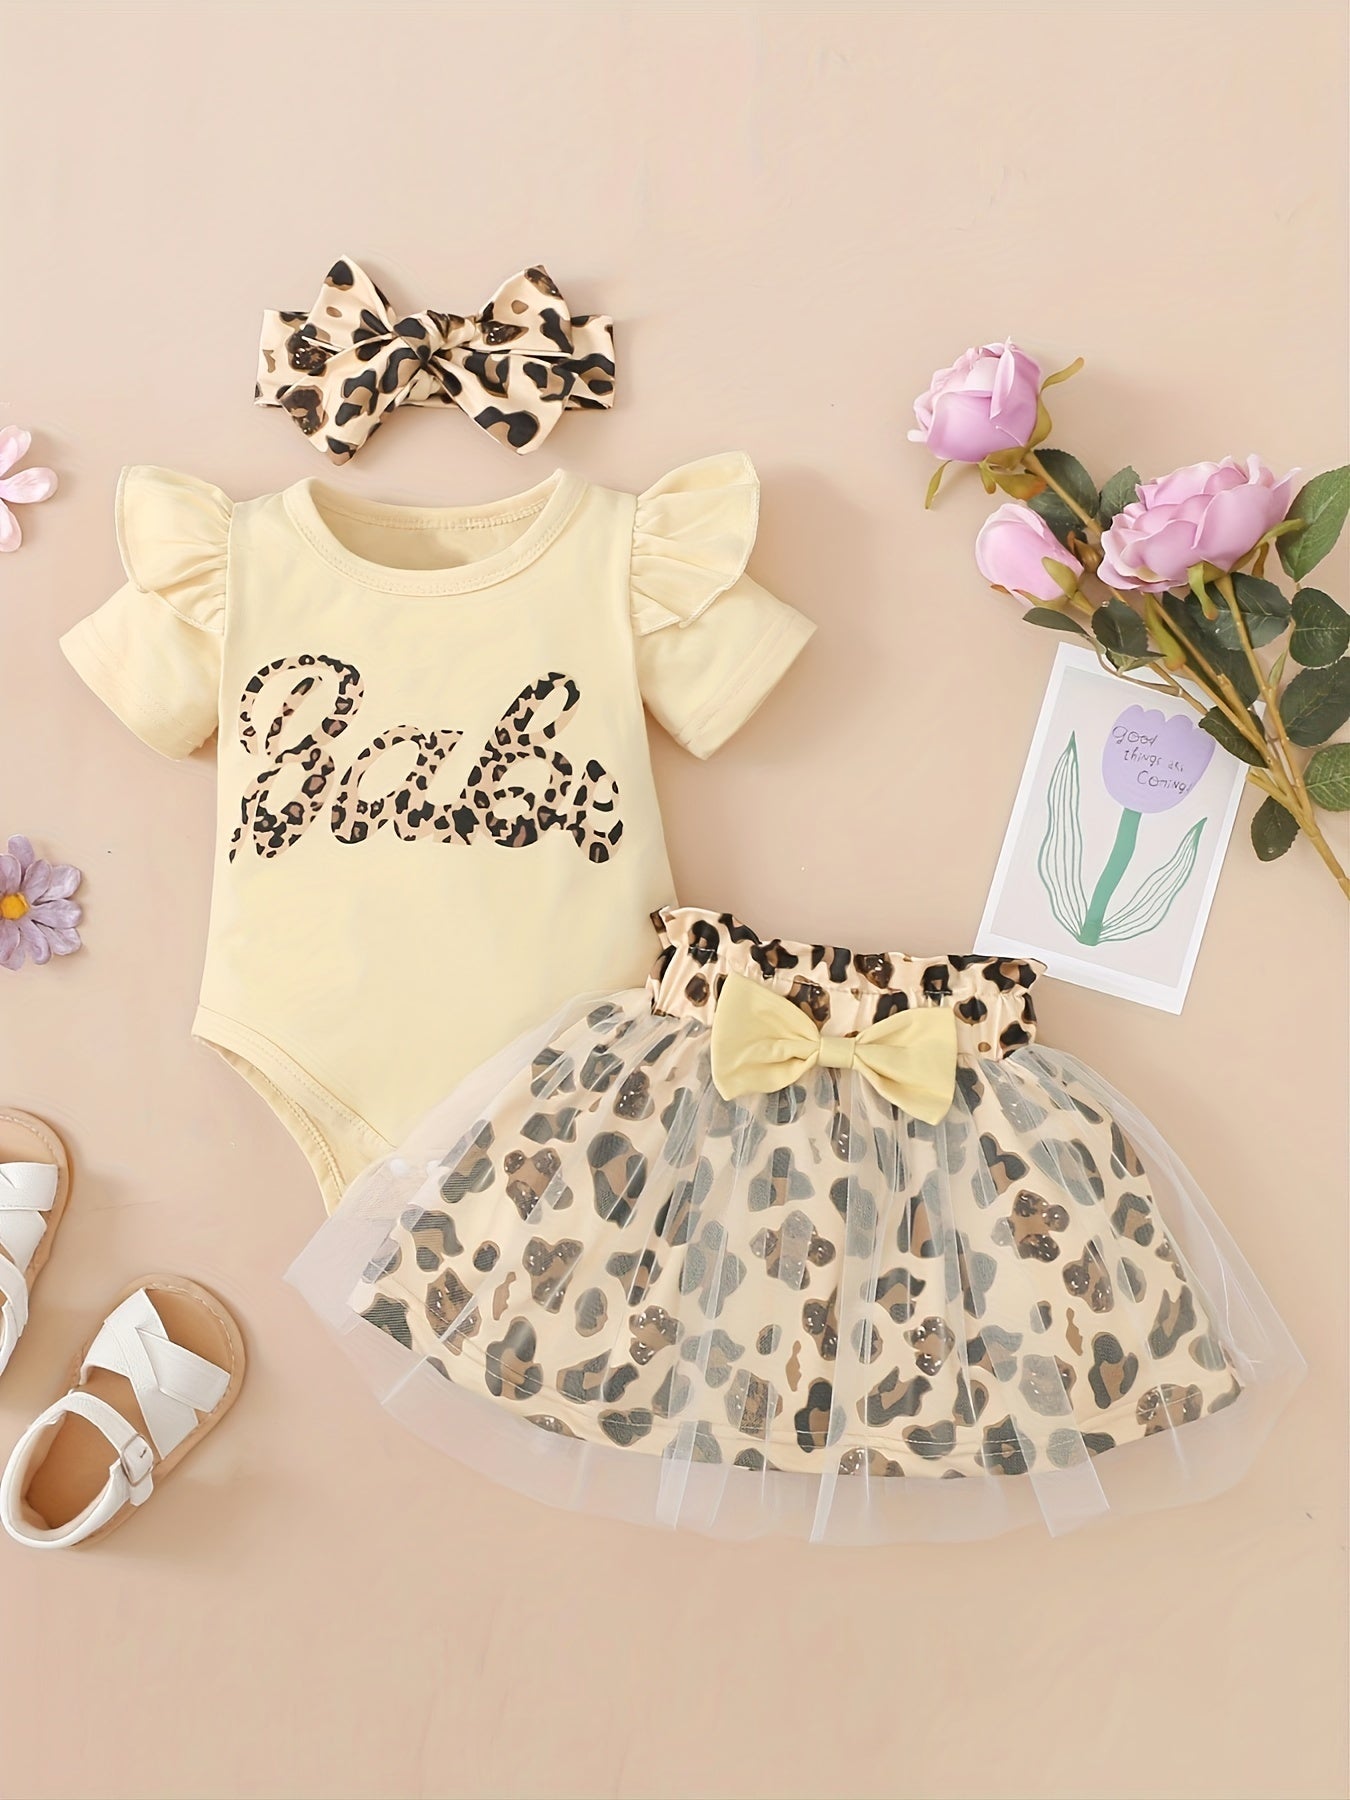 Baby Girls Cotton Ruffle Short Sleeve Bodysuit + Matching Mesh Skirts + Headband With Leopard Print Baby Clothes